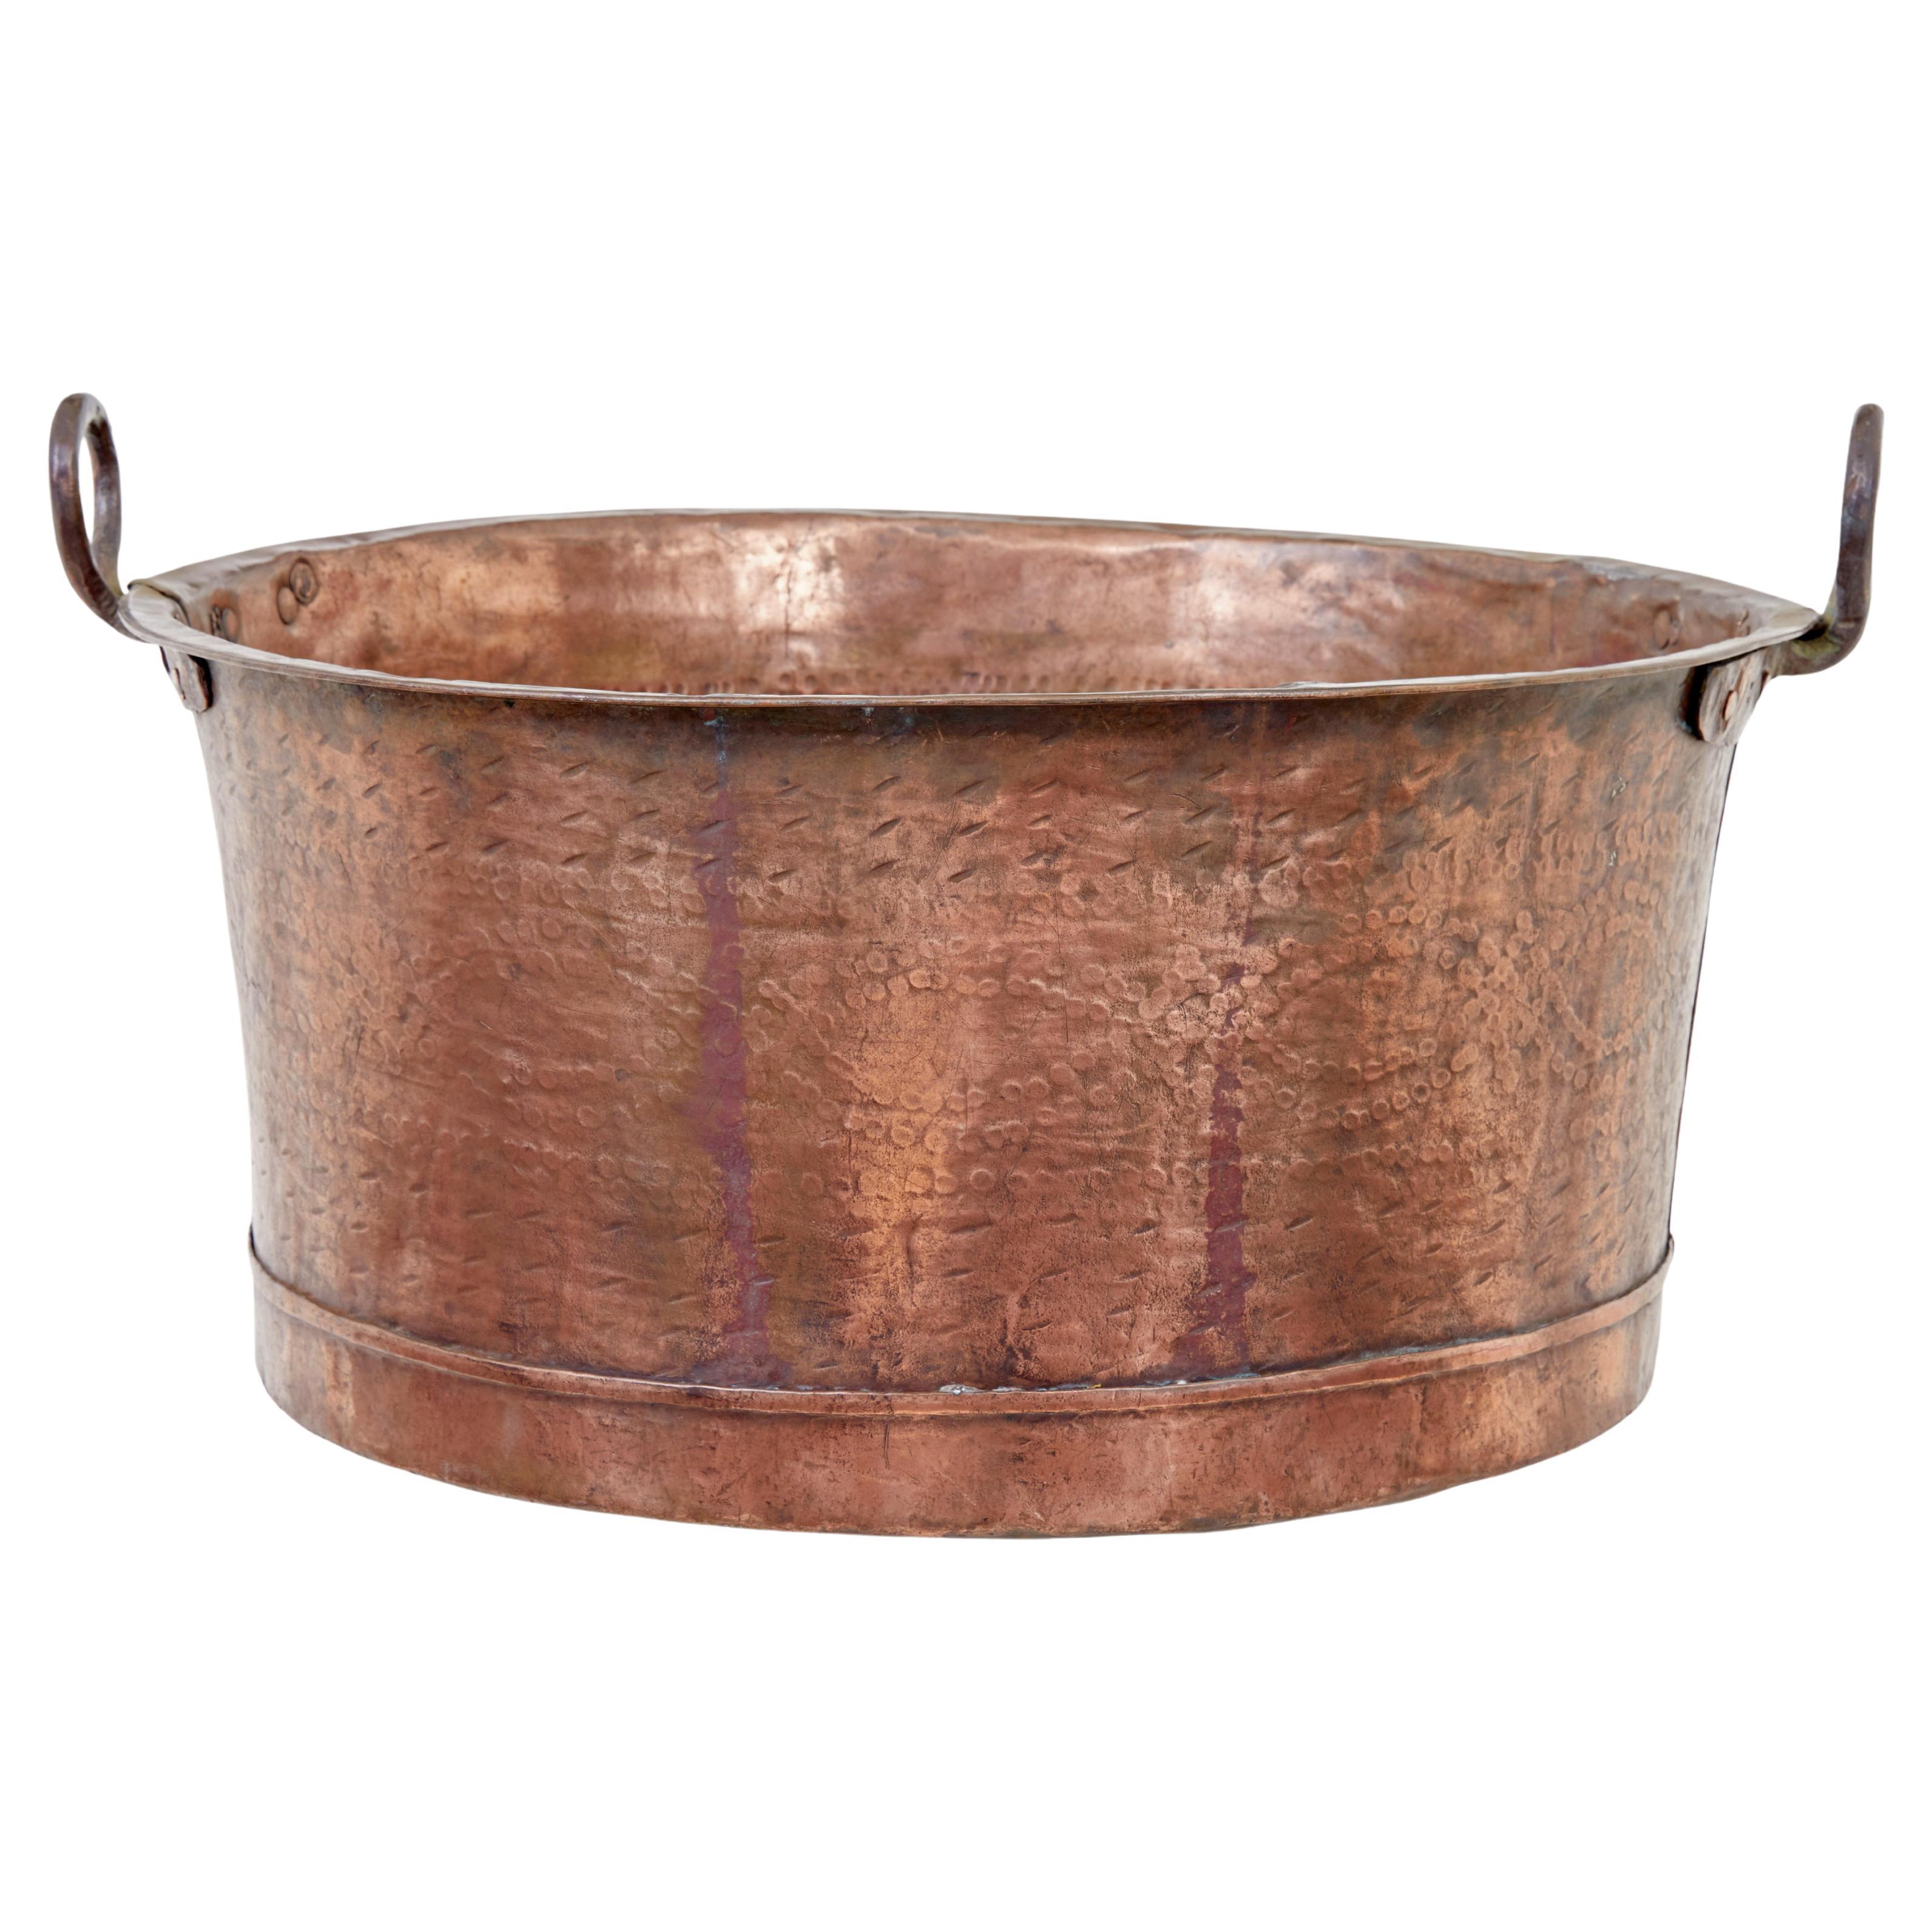 Victorian 19th century large copper cooking pot For Sale